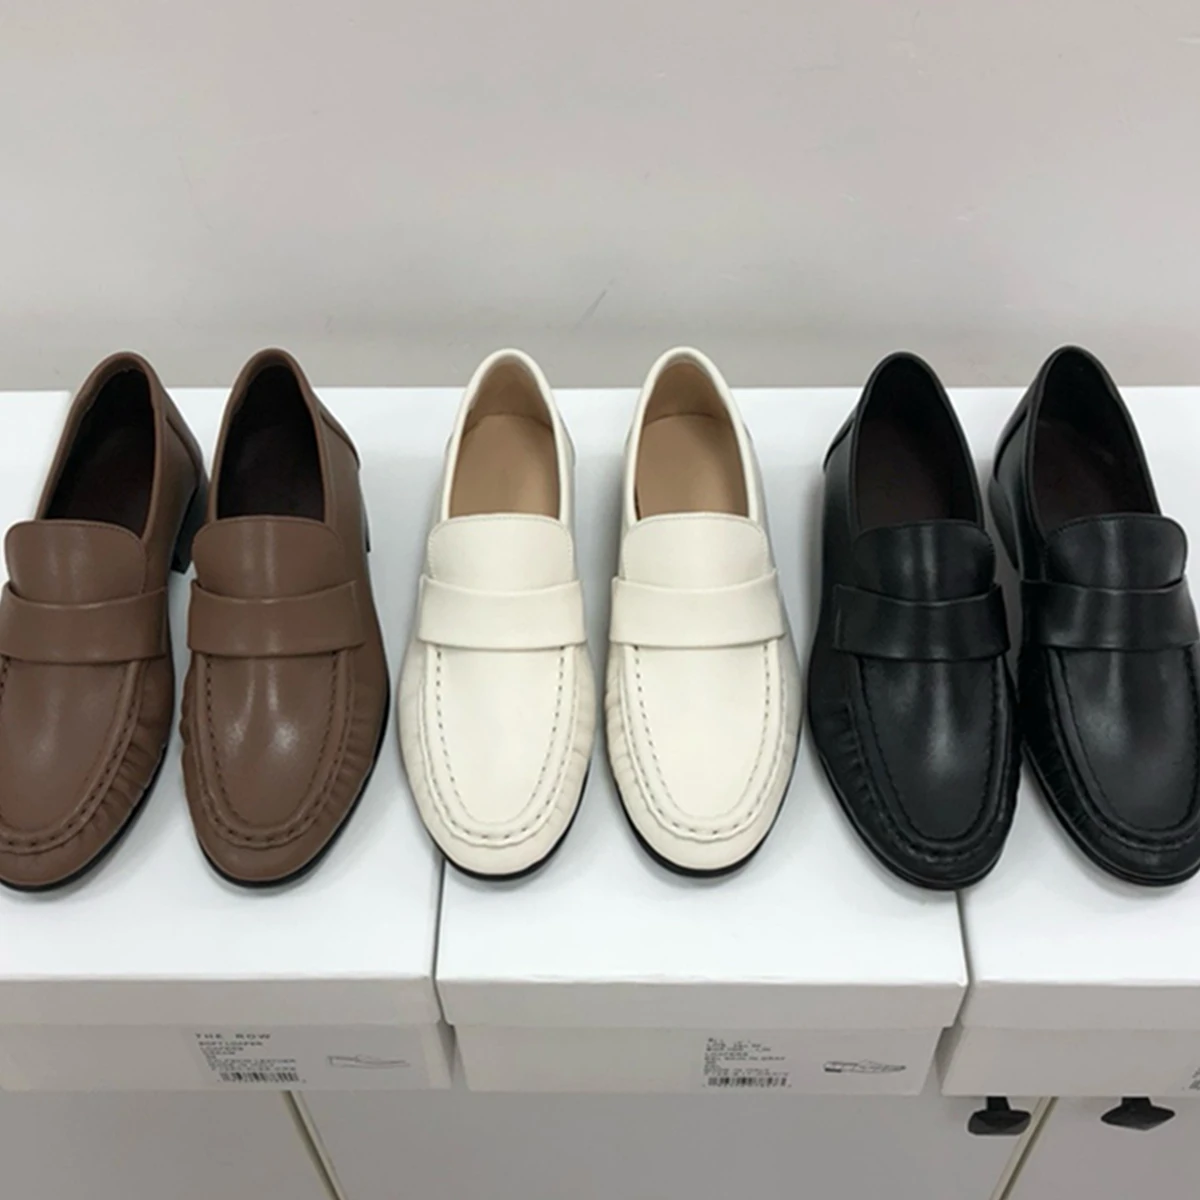 

Jenny&Dave Genuine Leather Nordic Minimalist And Fashionable Leather Flat Shoes Women Commuter Leisure Slip-On Loafers Shoes